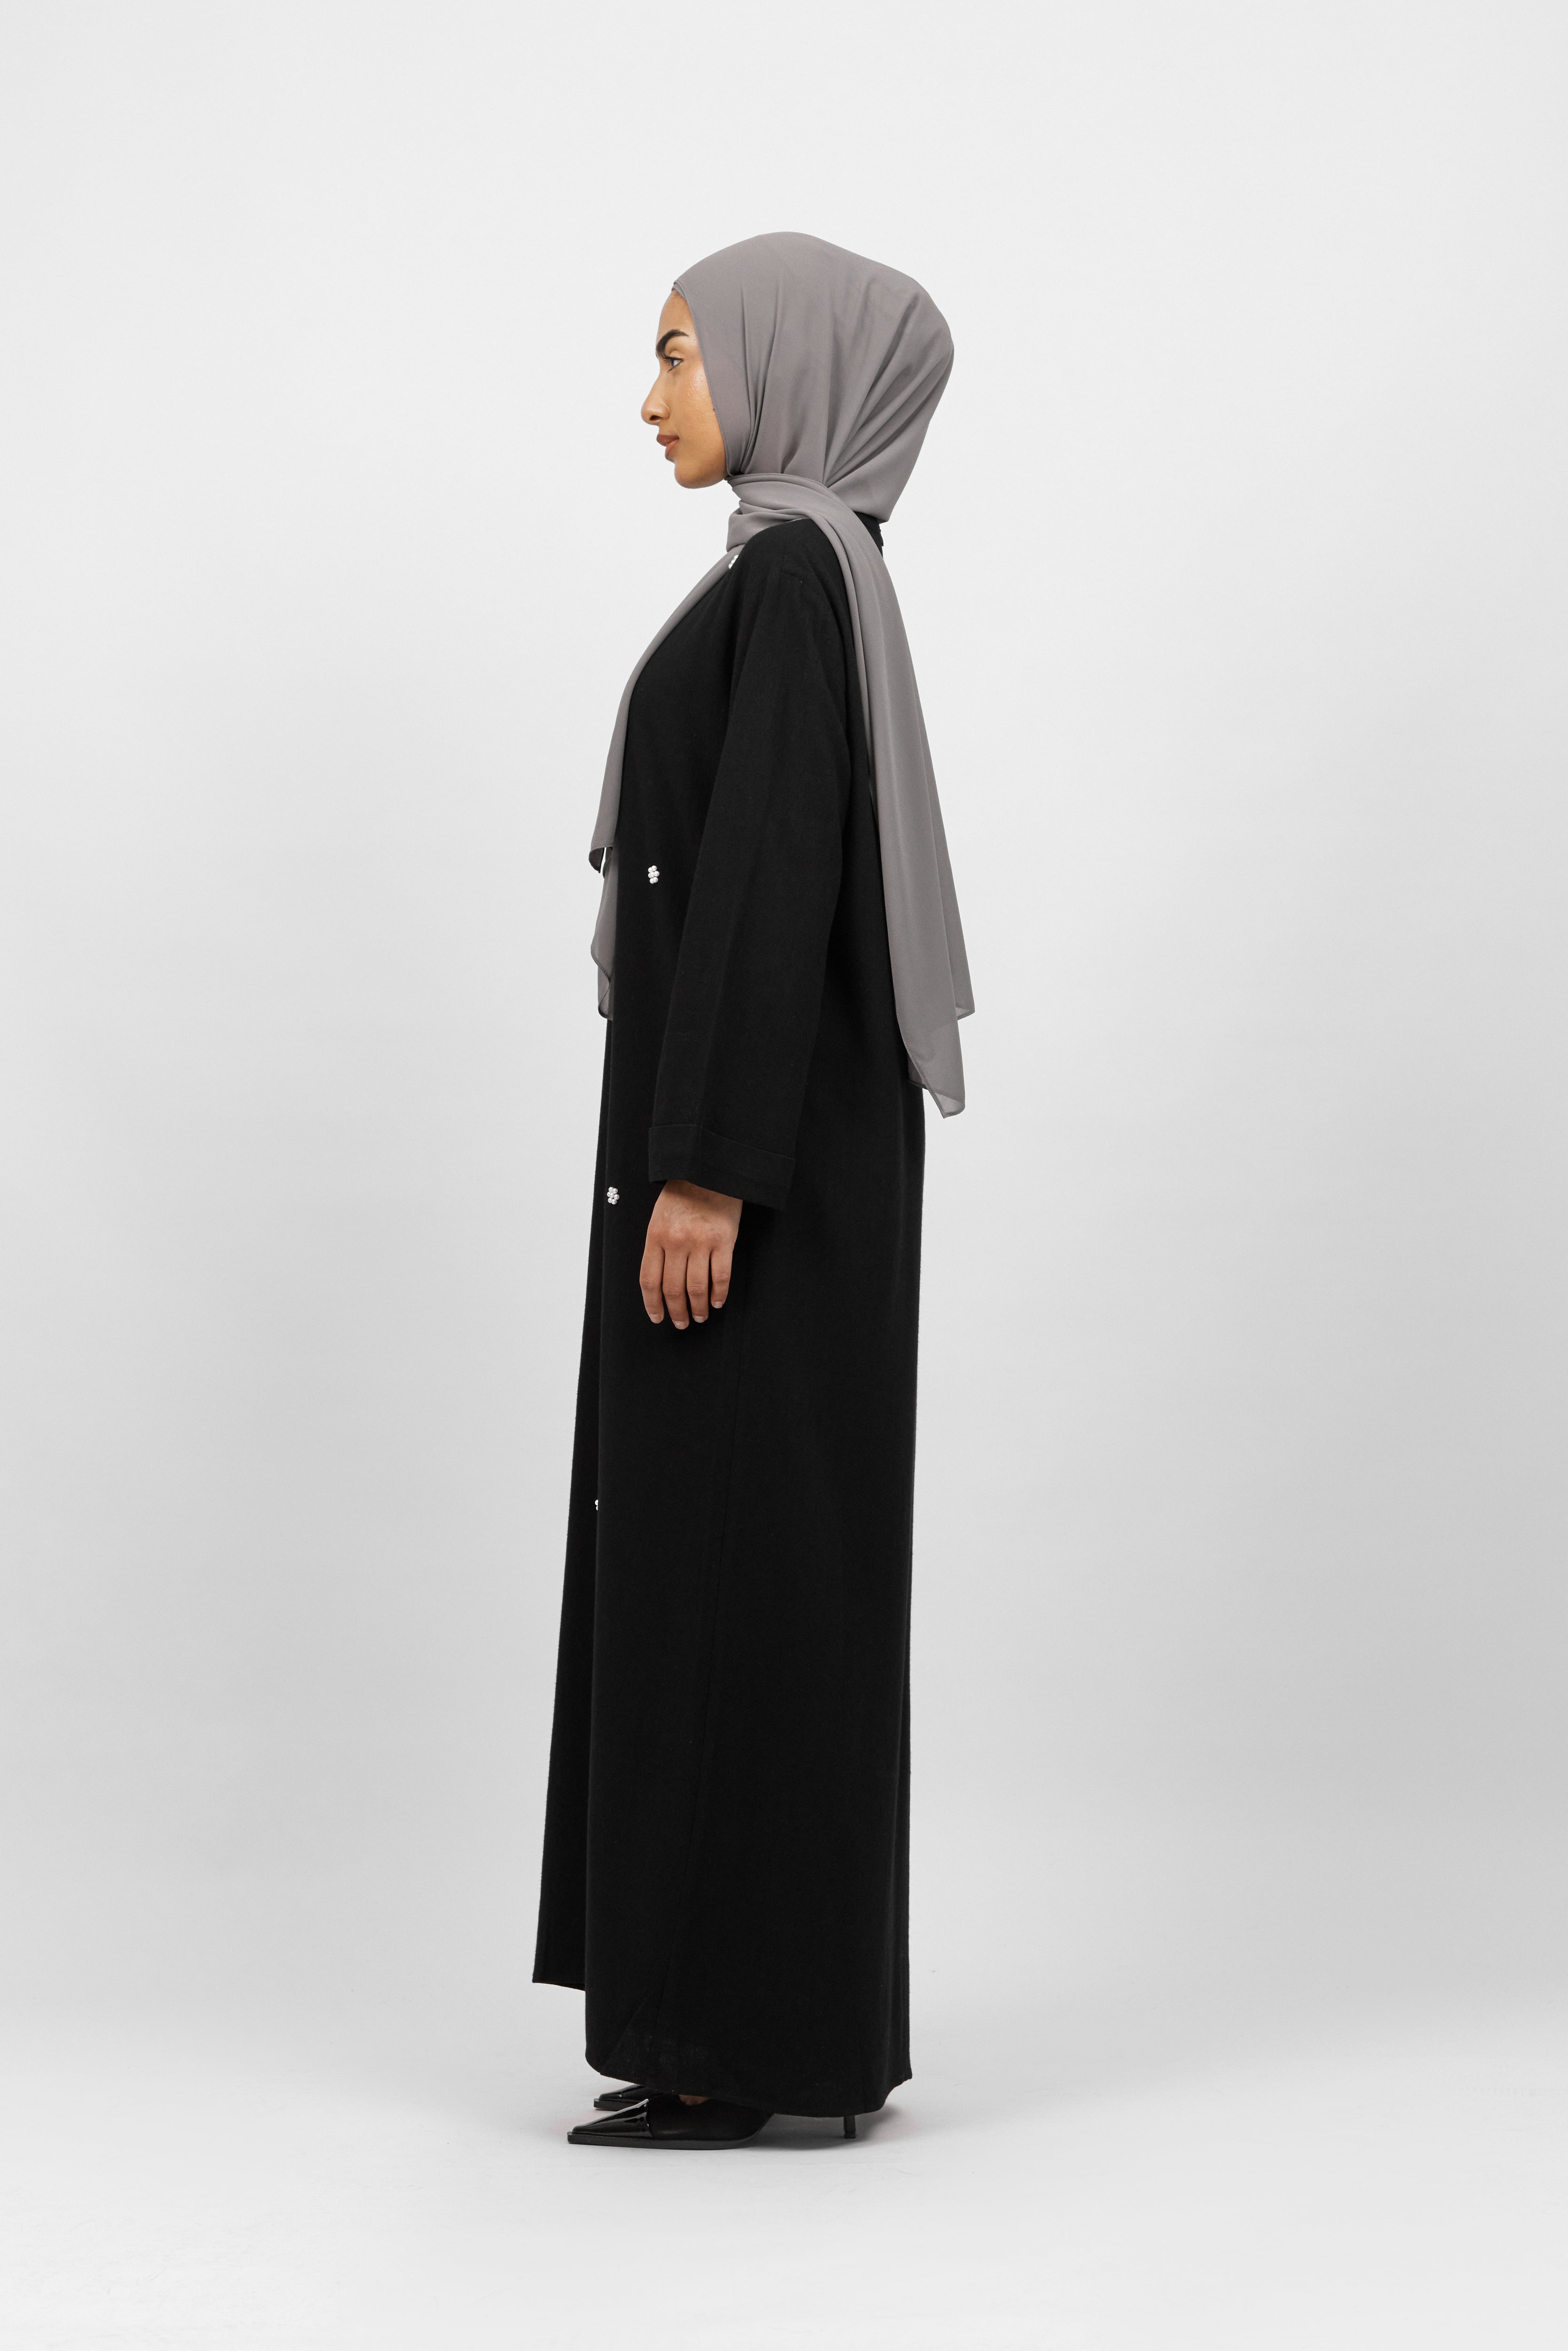 AE - Pearl Relaxed Fit Abaya - Black